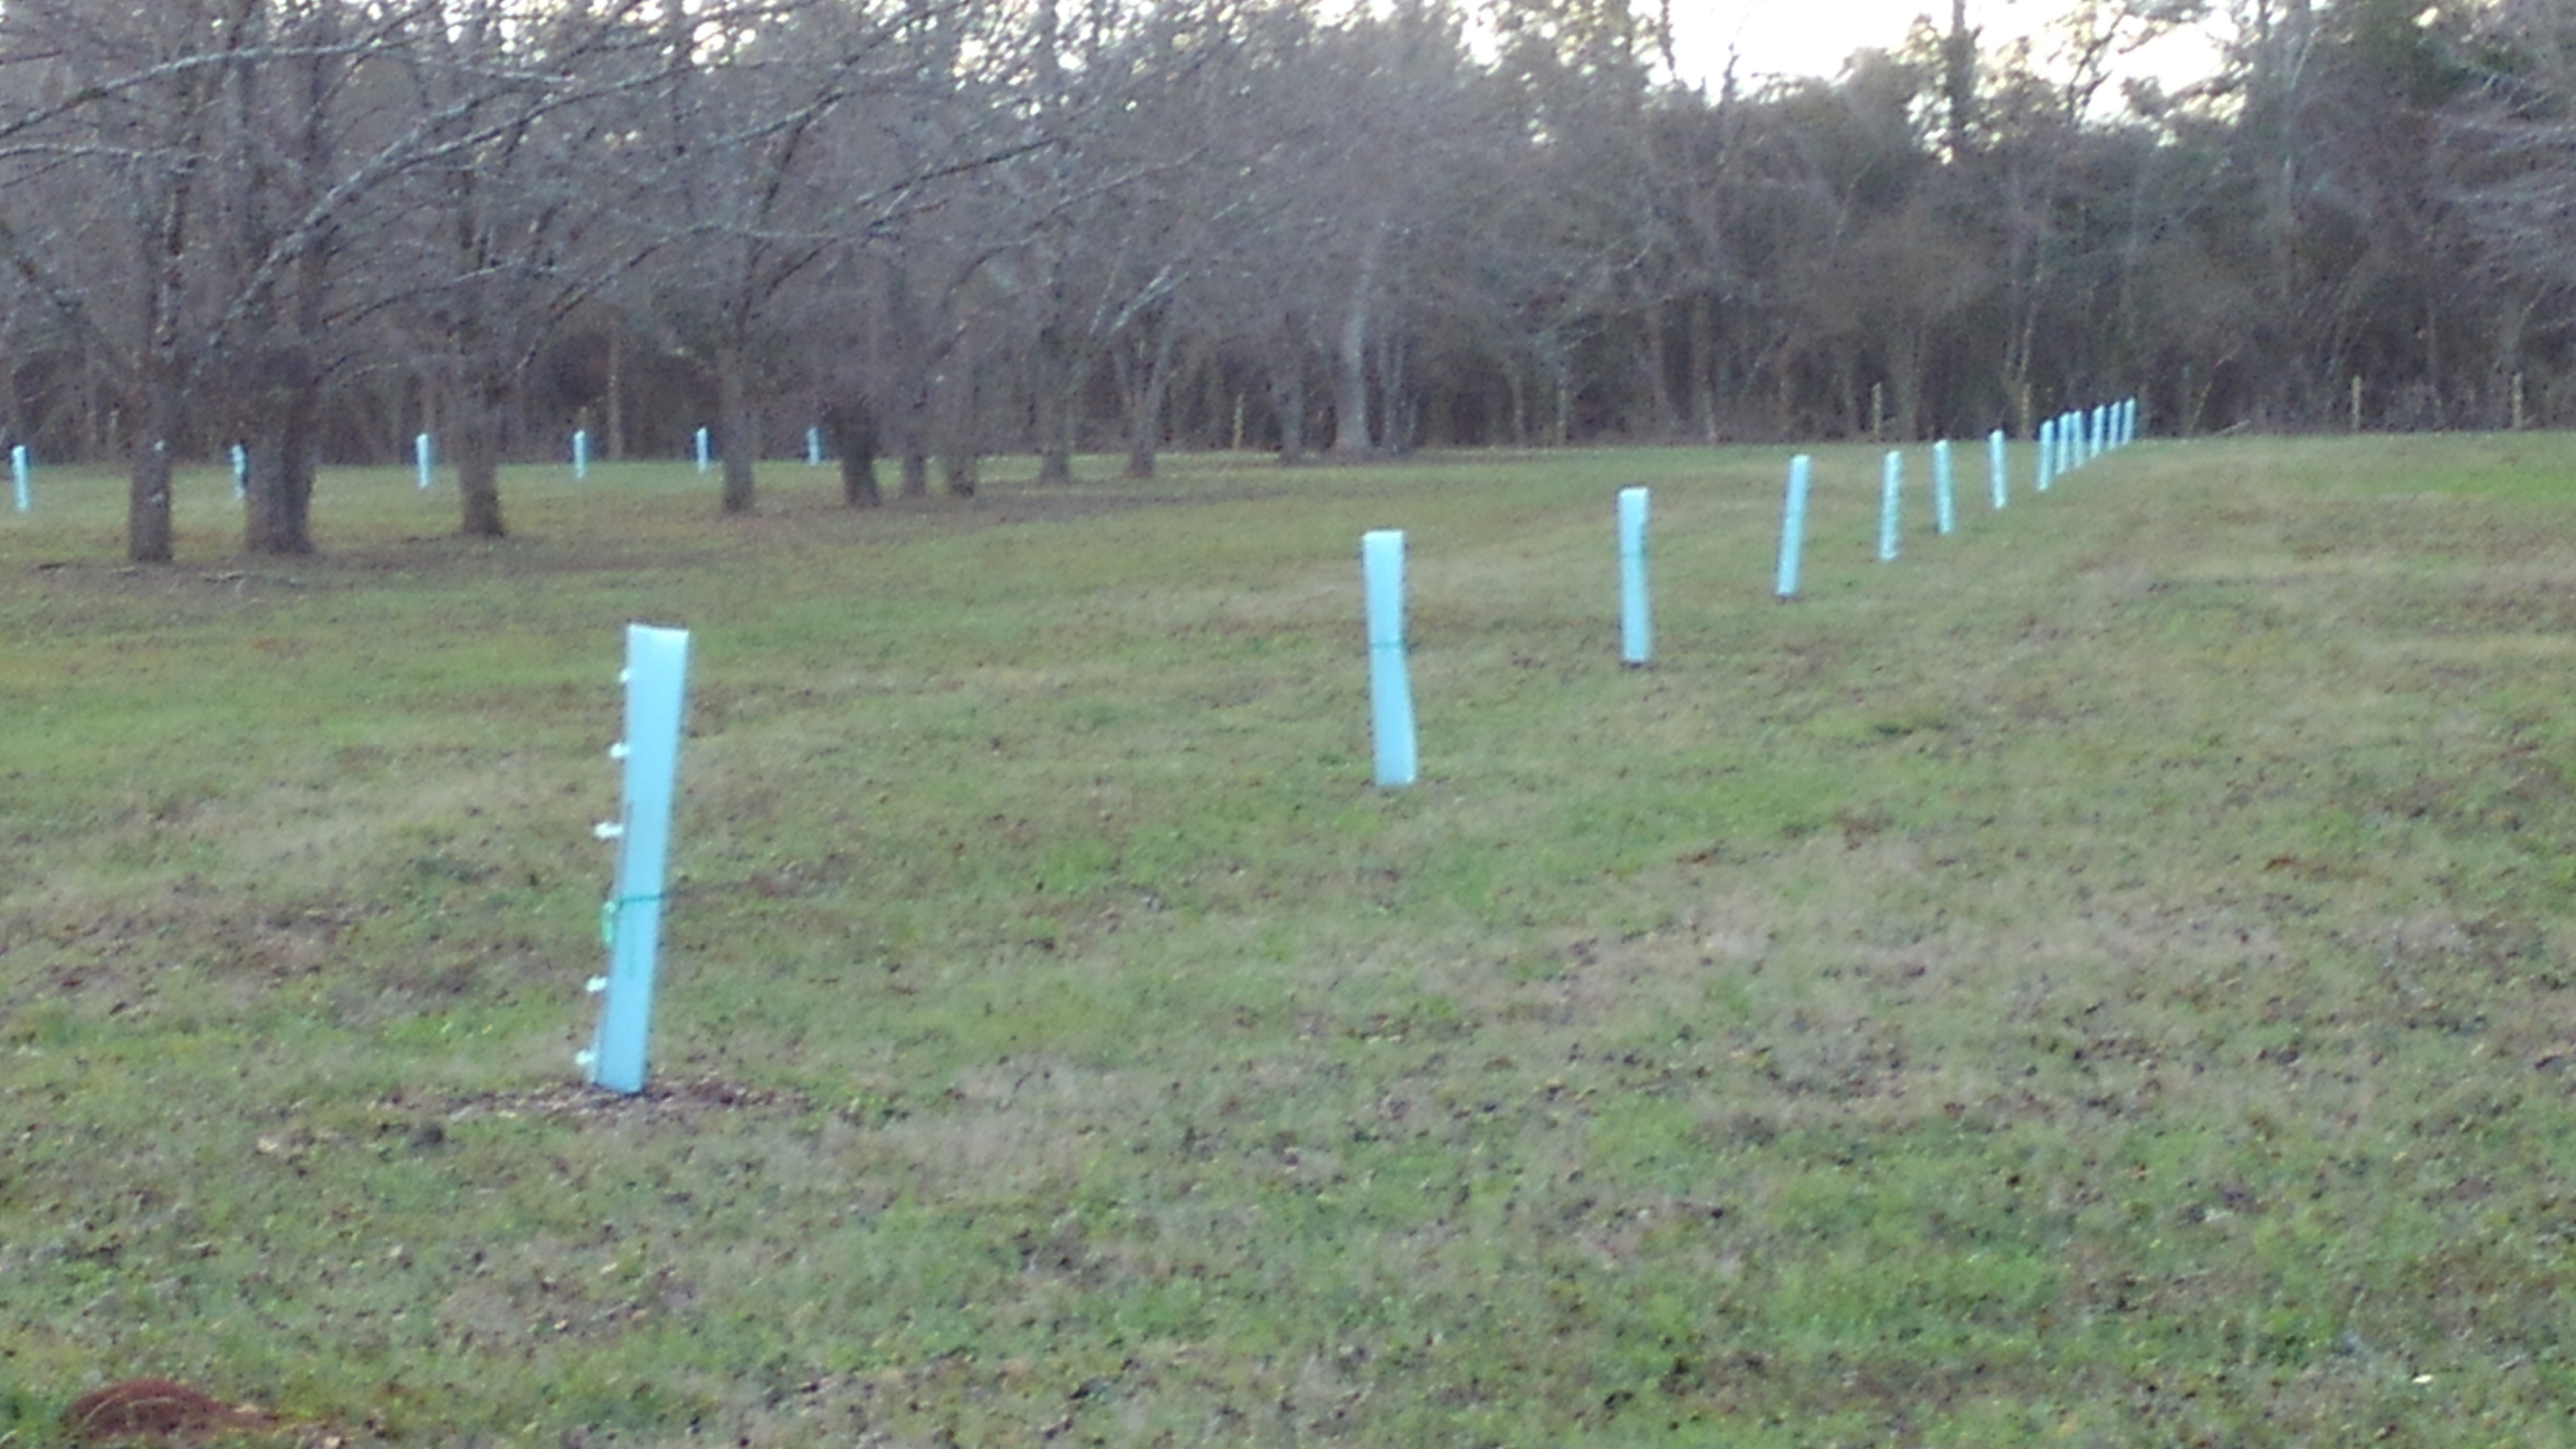 newly planted trees